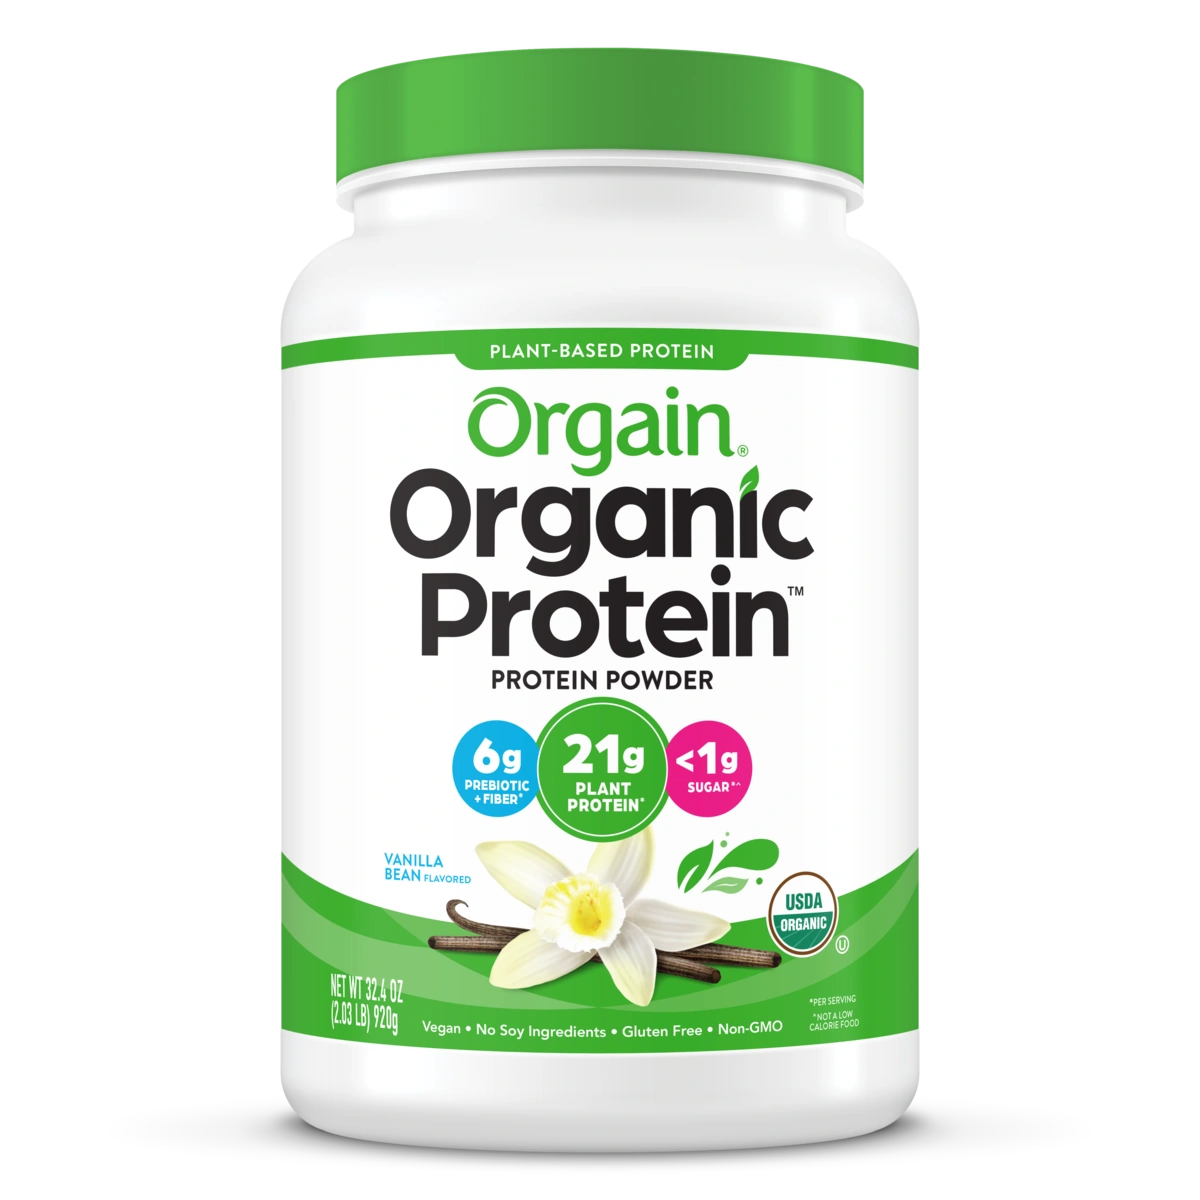 Front of Organic Protein Plant Based Protein Powder - Vanilla Bean Flavor in the 2.03lb Canister Size